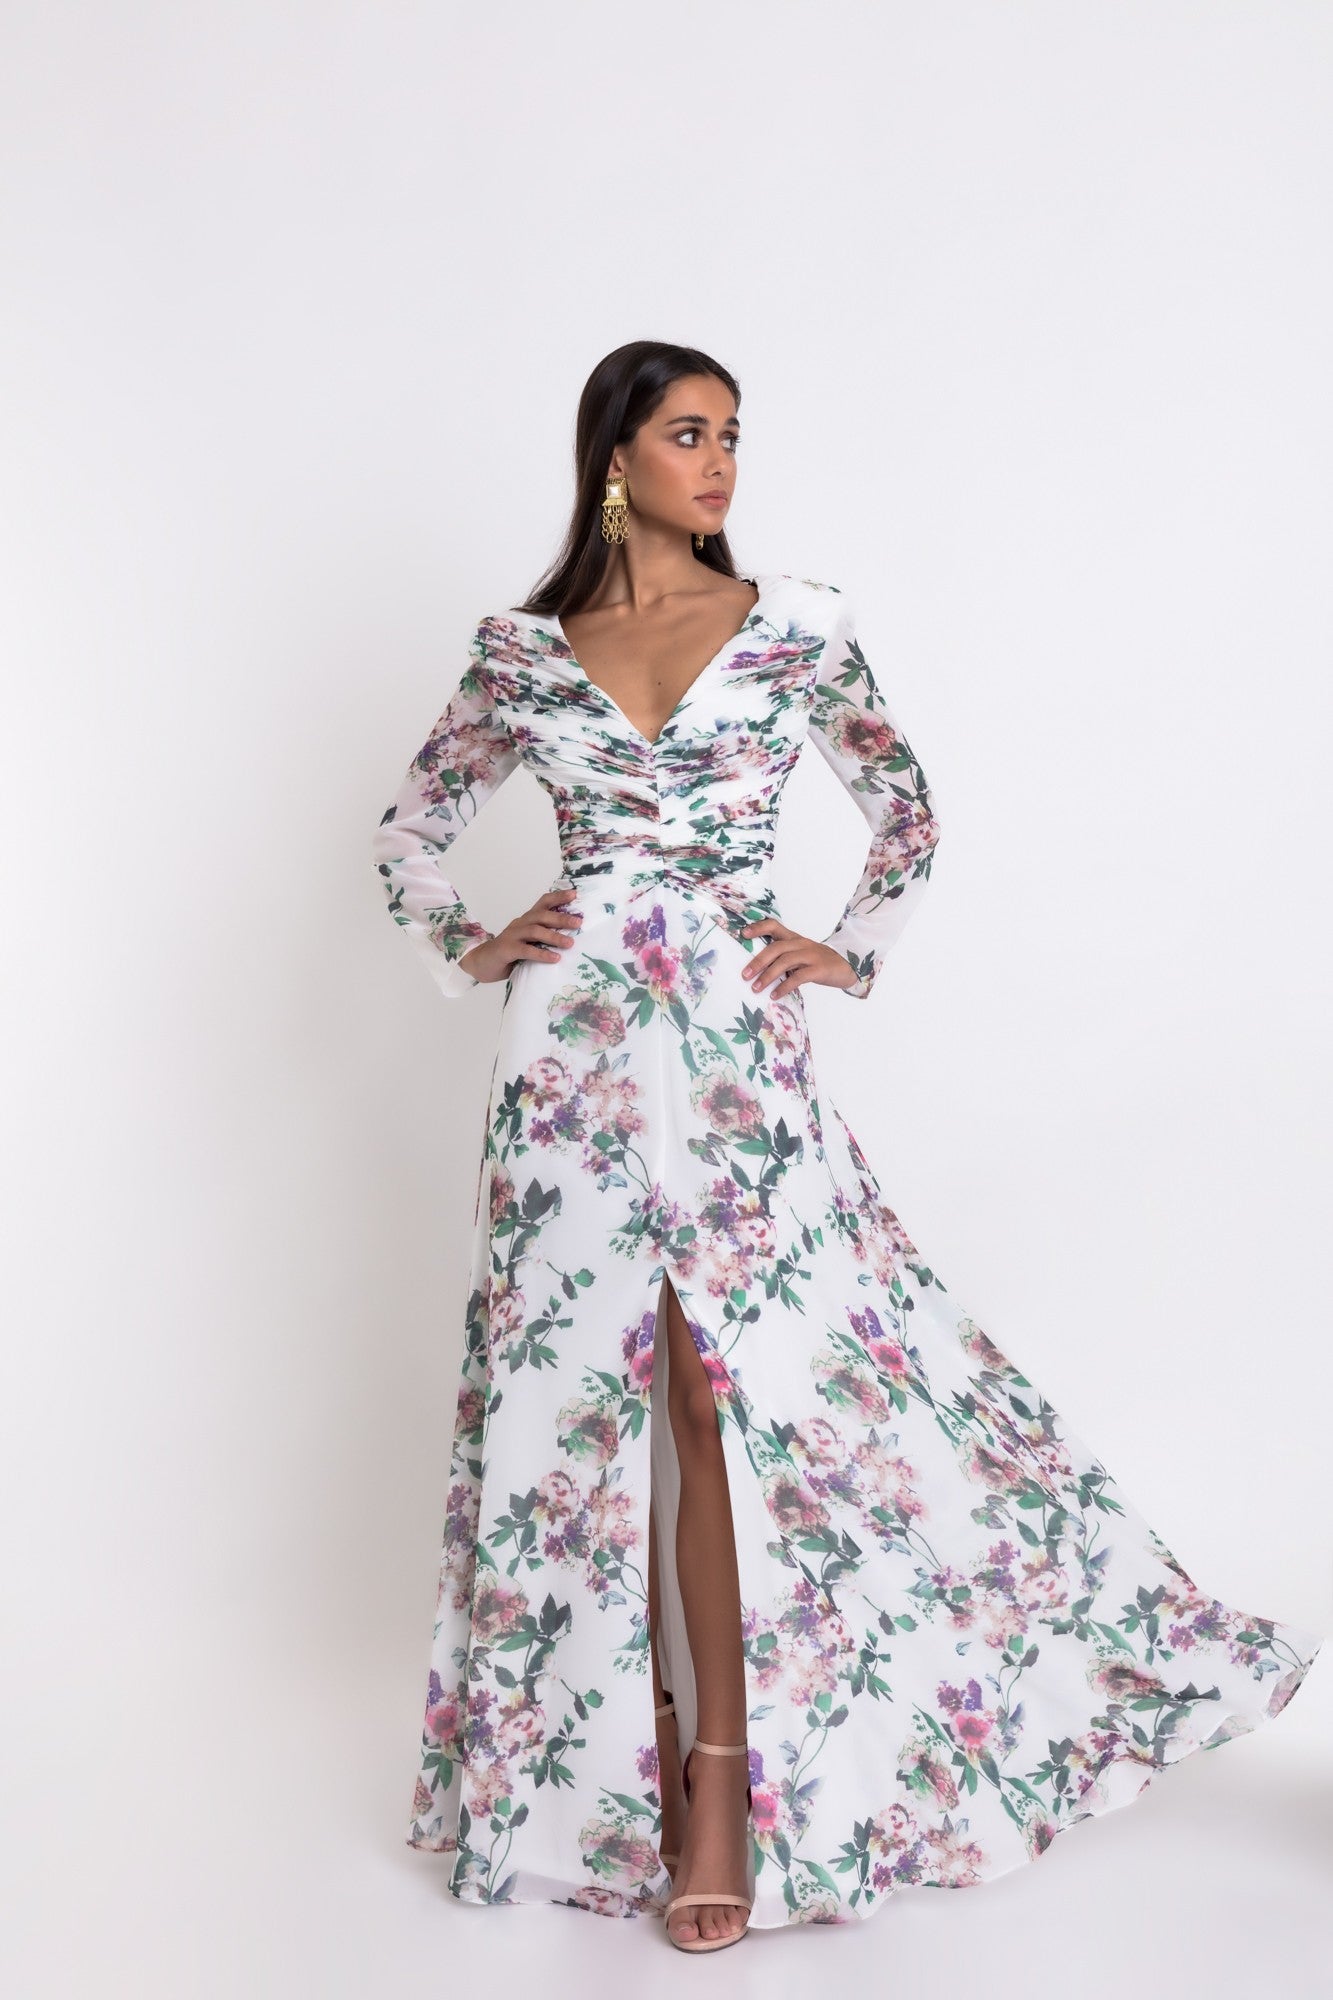 Matilde Cano Ivory Floral Dress 2406